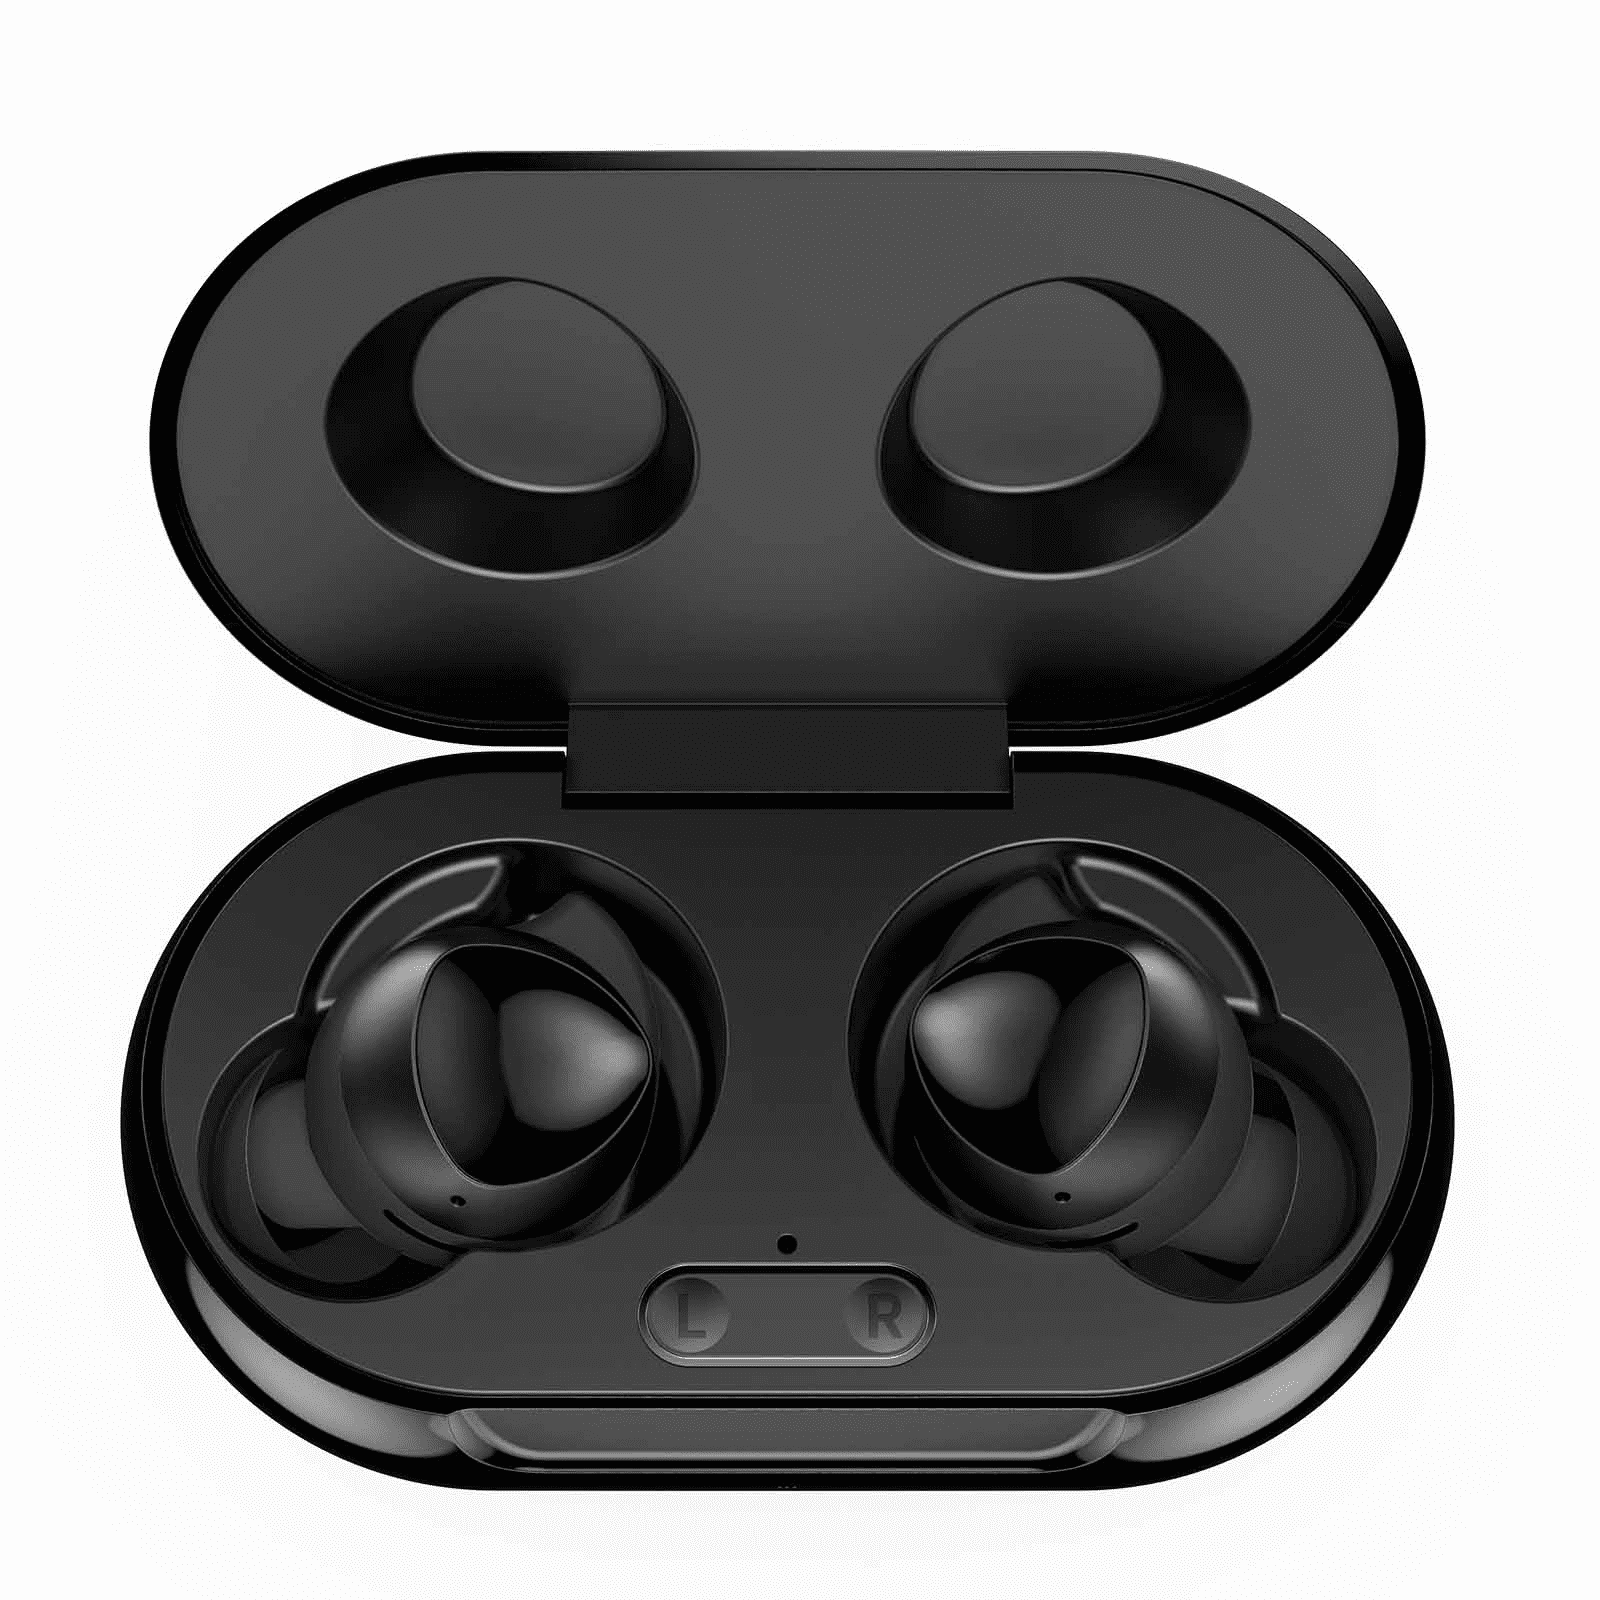 UrbanX Street Buds Plus True Bluetooth Wireless Earbuds Huawei P9 Plus Active Noise Cancelling (Charging Case Included) Black Walmart.com